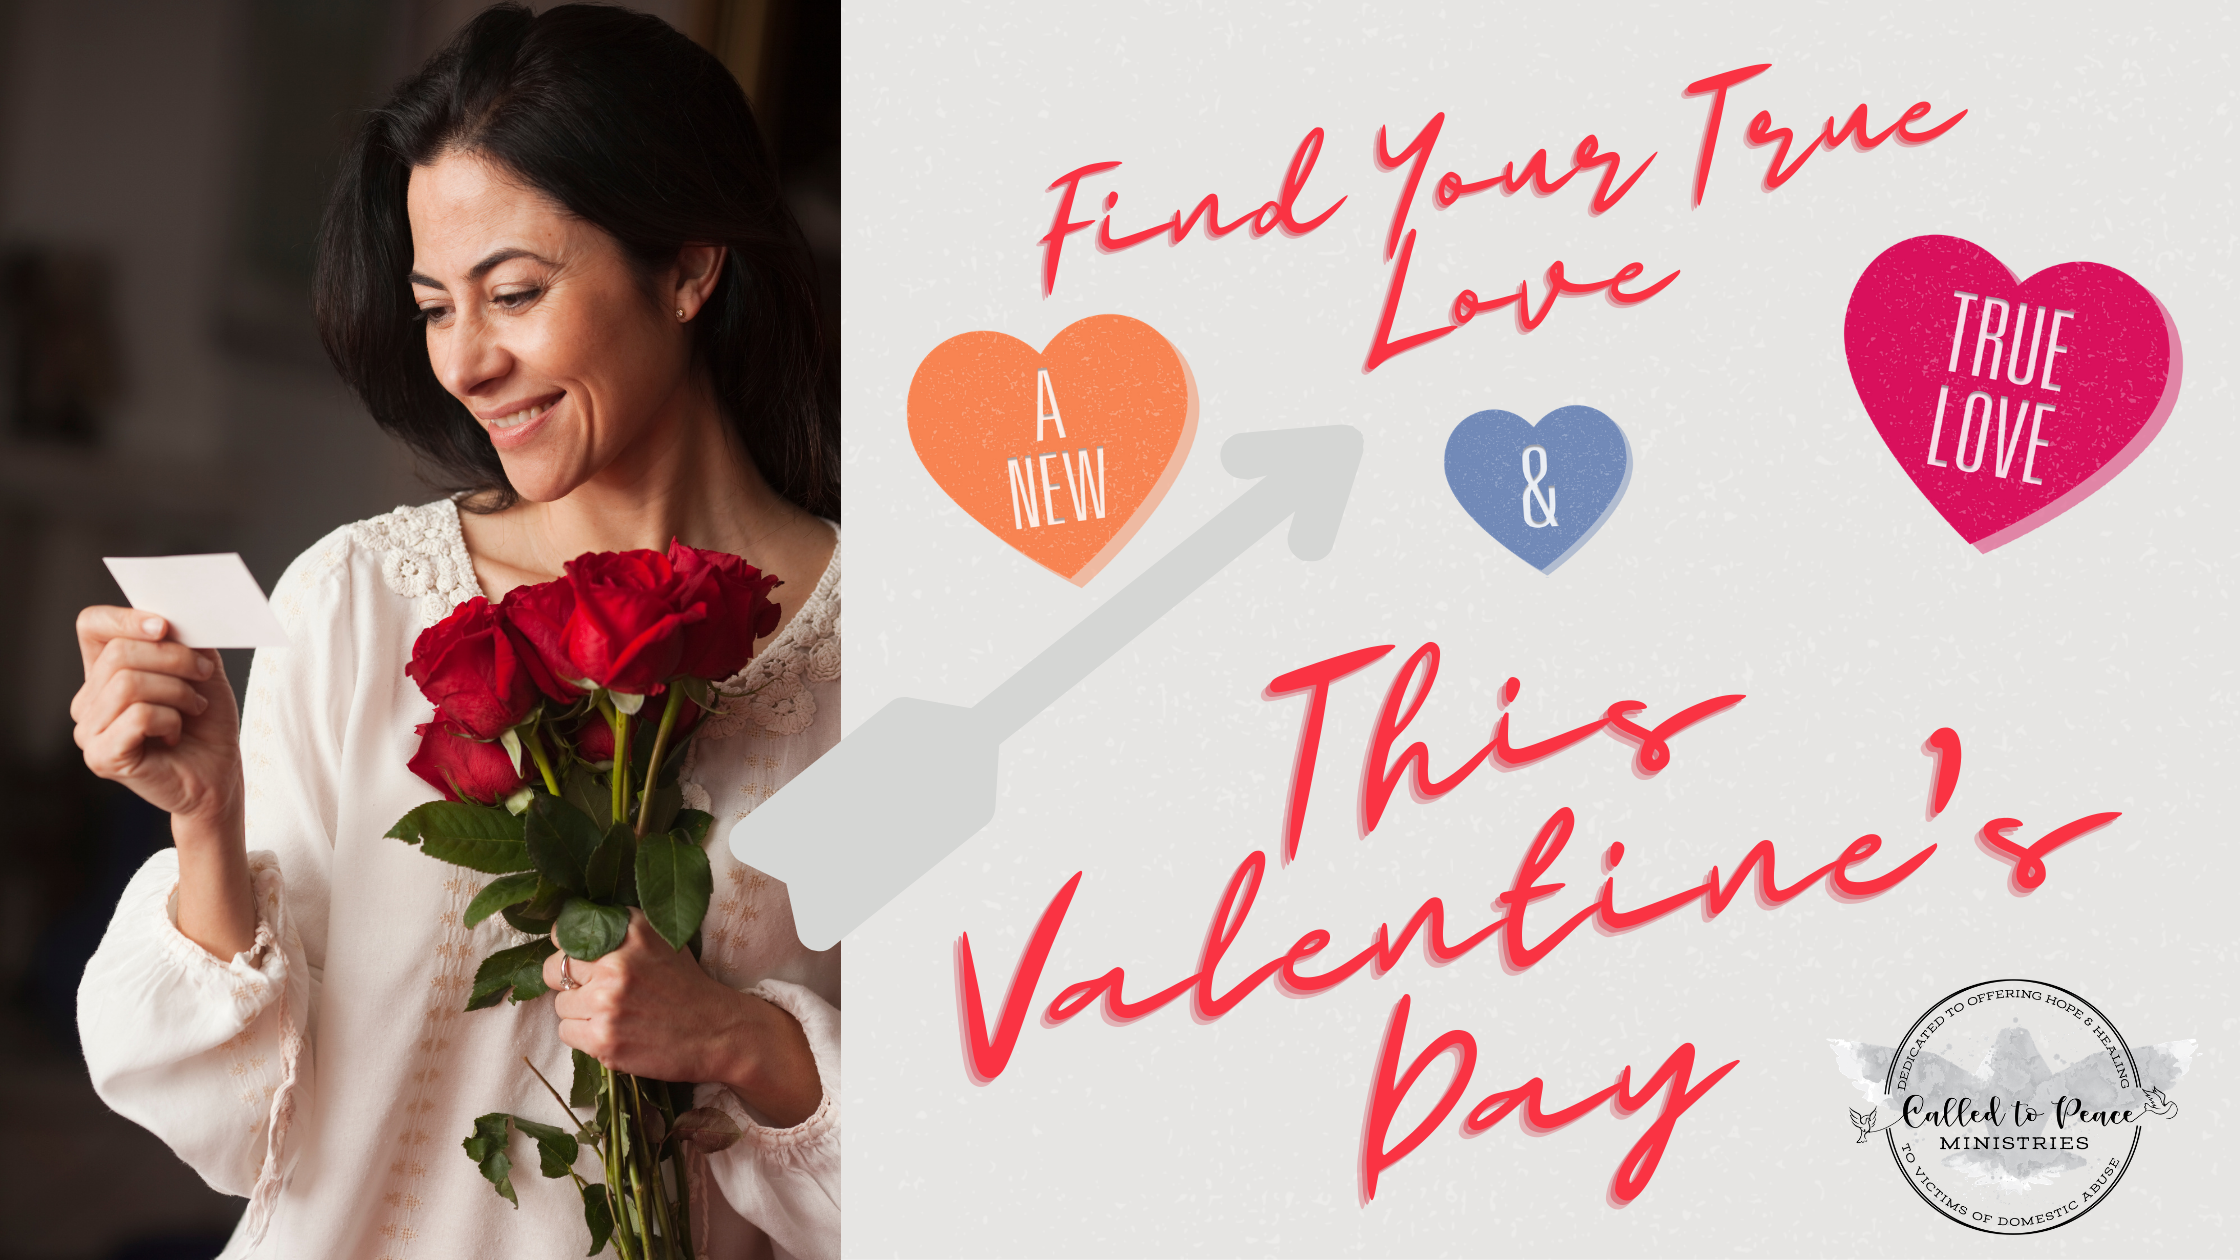 Finding Your True Love this Valentine’s Day